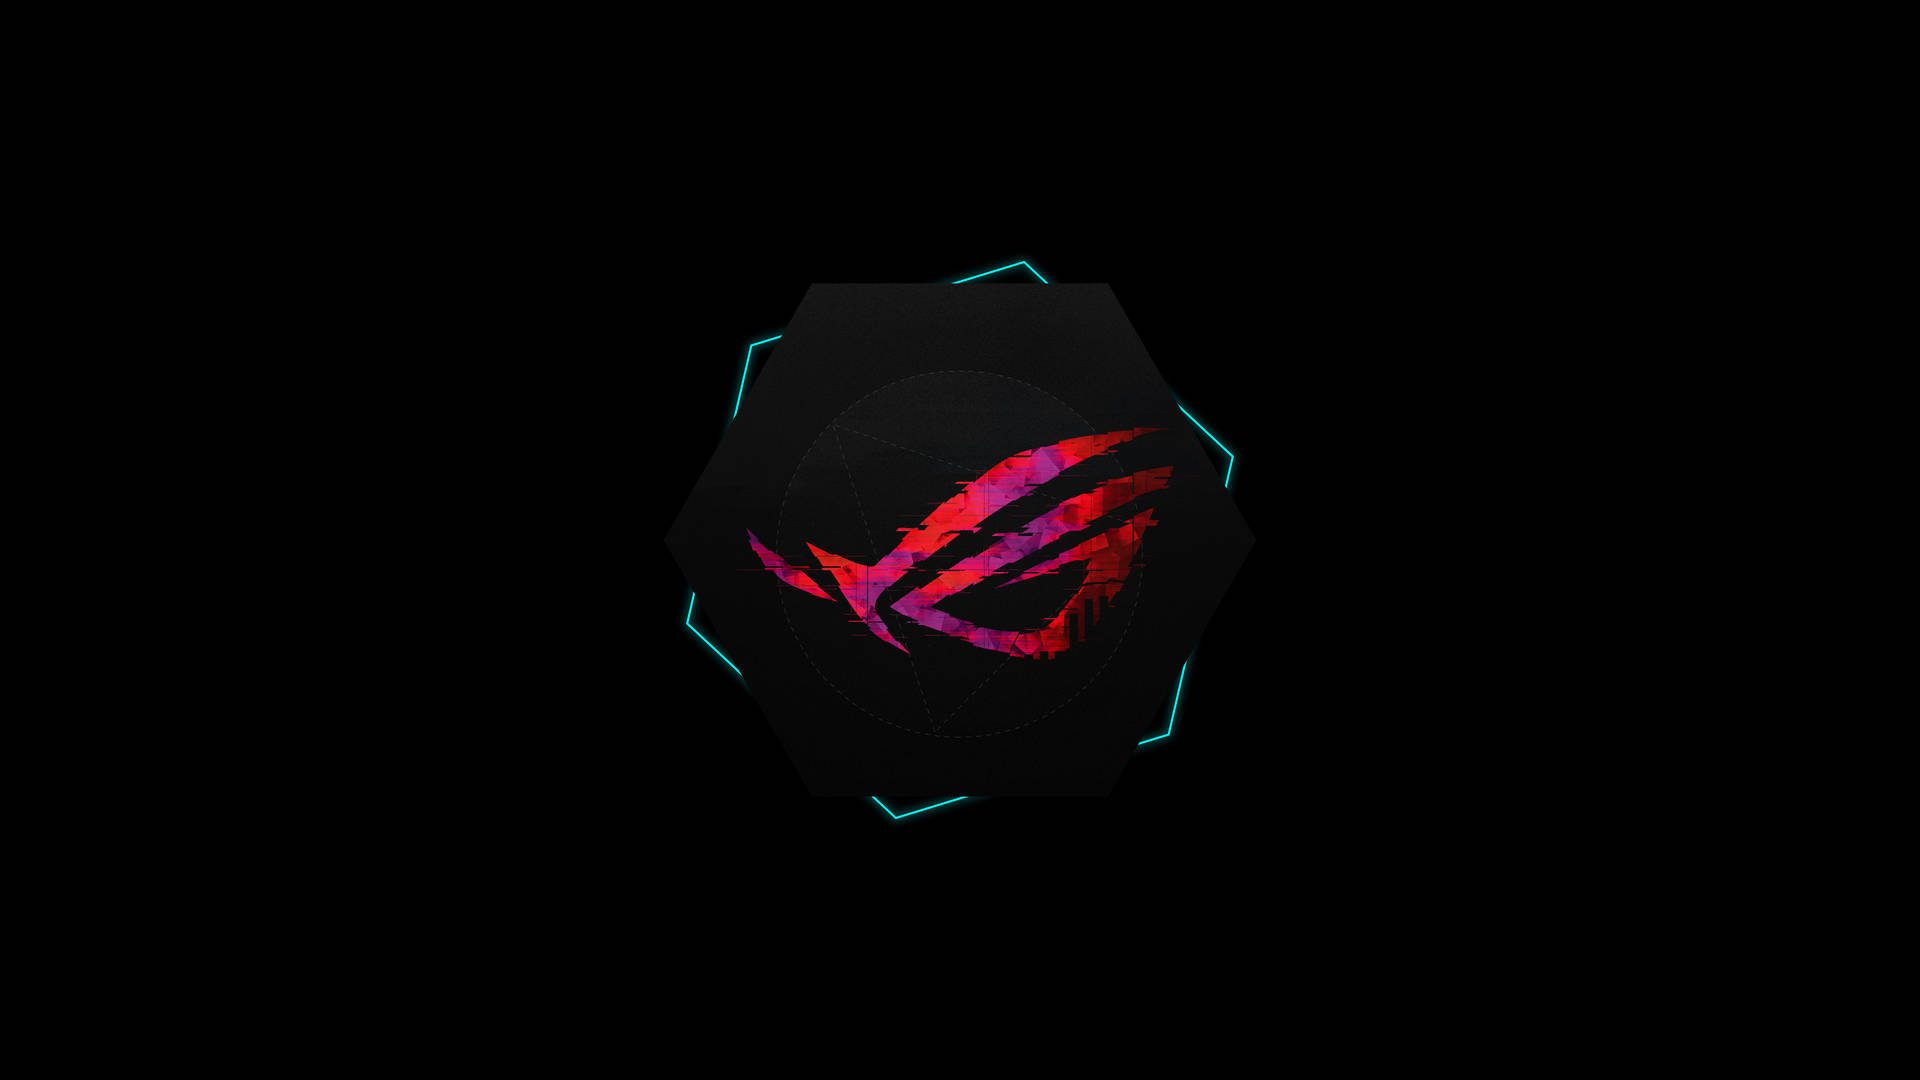 Splendid Hd Image Exhibiting A Vibrant Rog Gaming Logo In Purple And Red Hues. Background